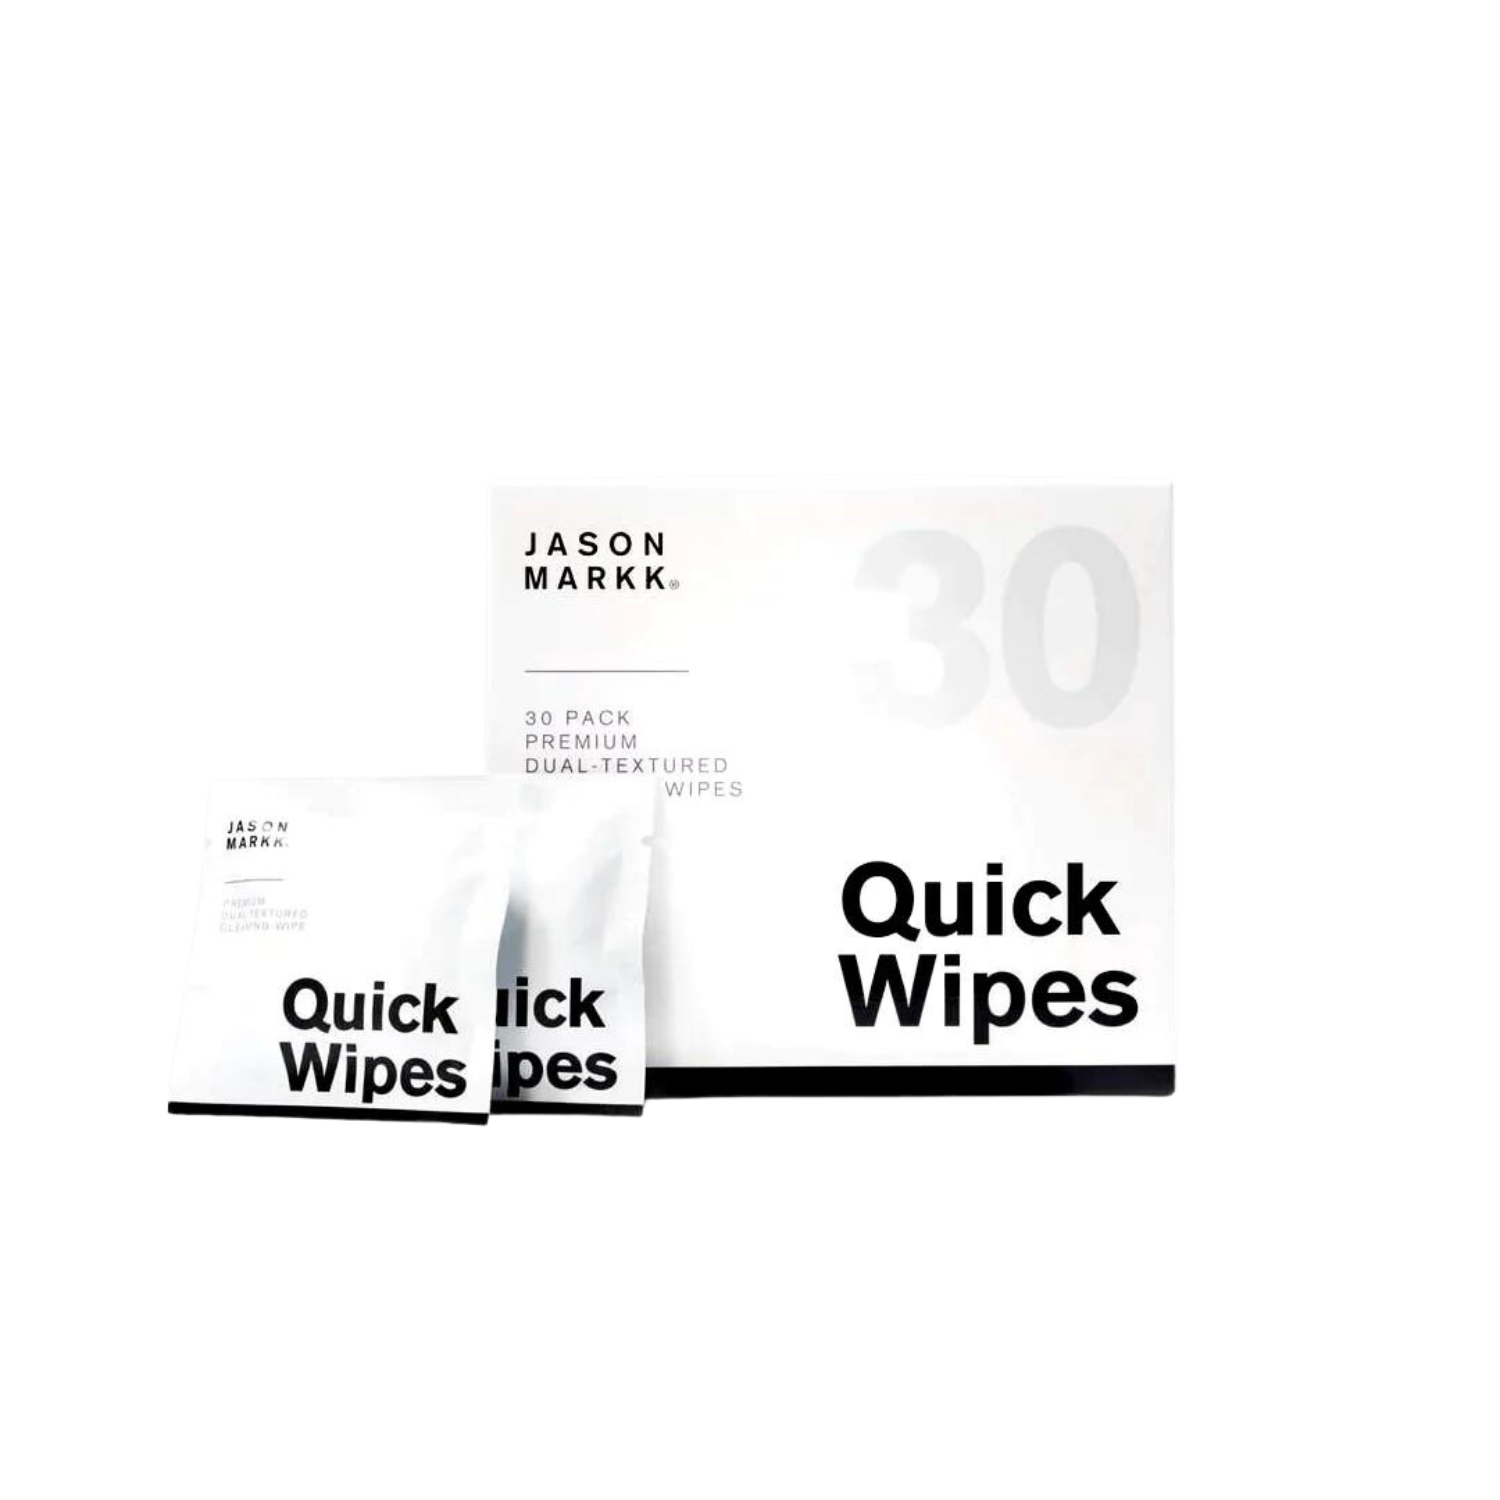 QUICK WIPES - 30 PACK